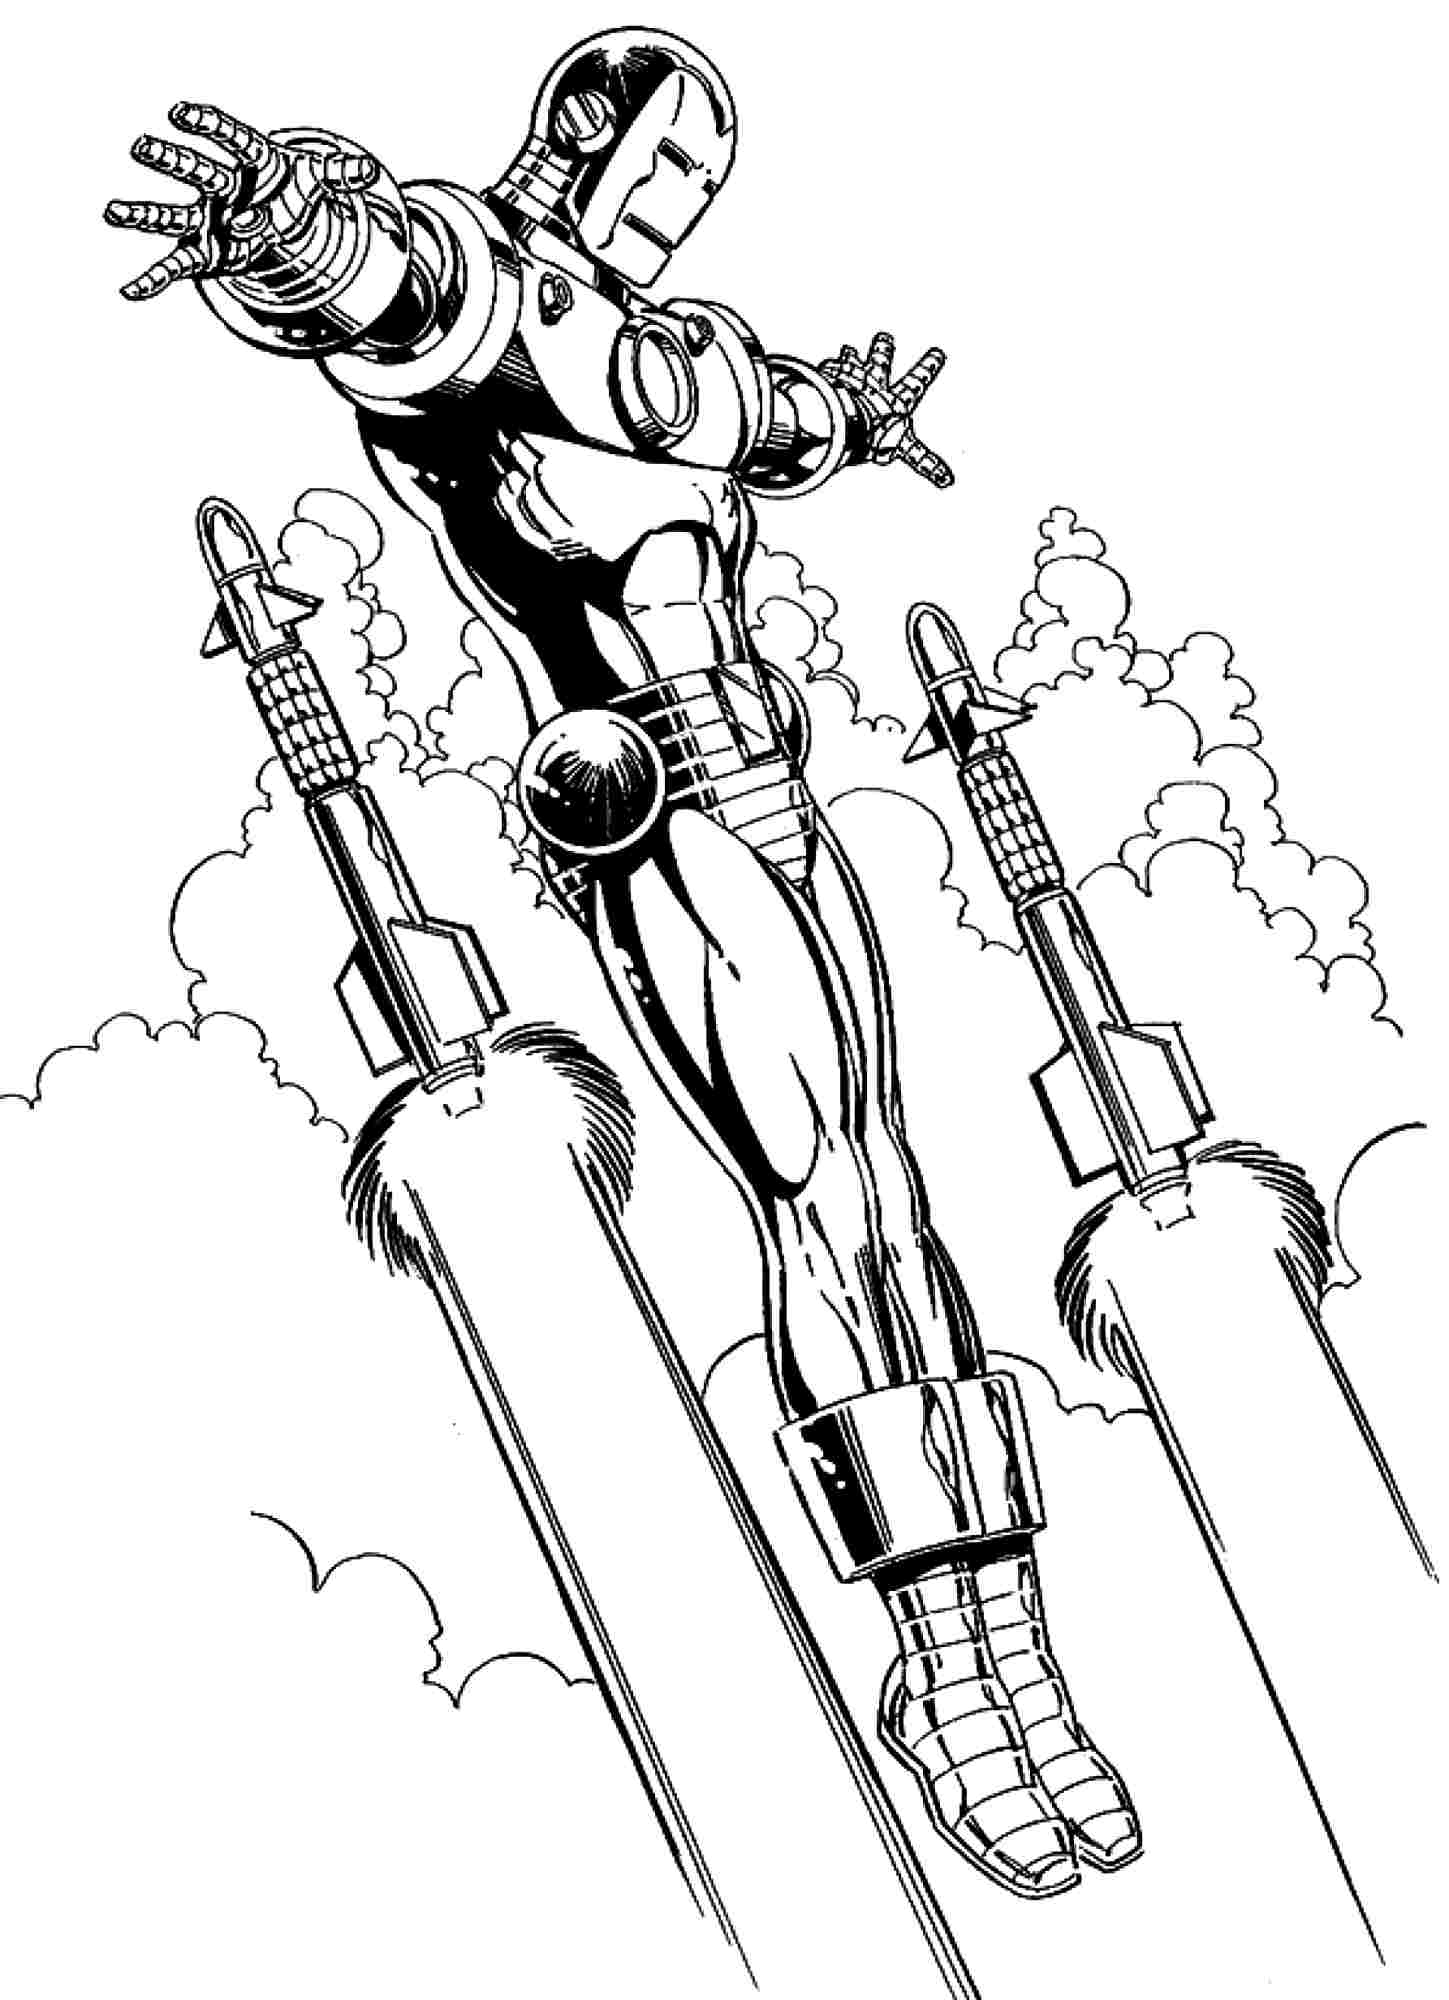 Iron Man #80599 (Superheroes) – Printable coloring pages